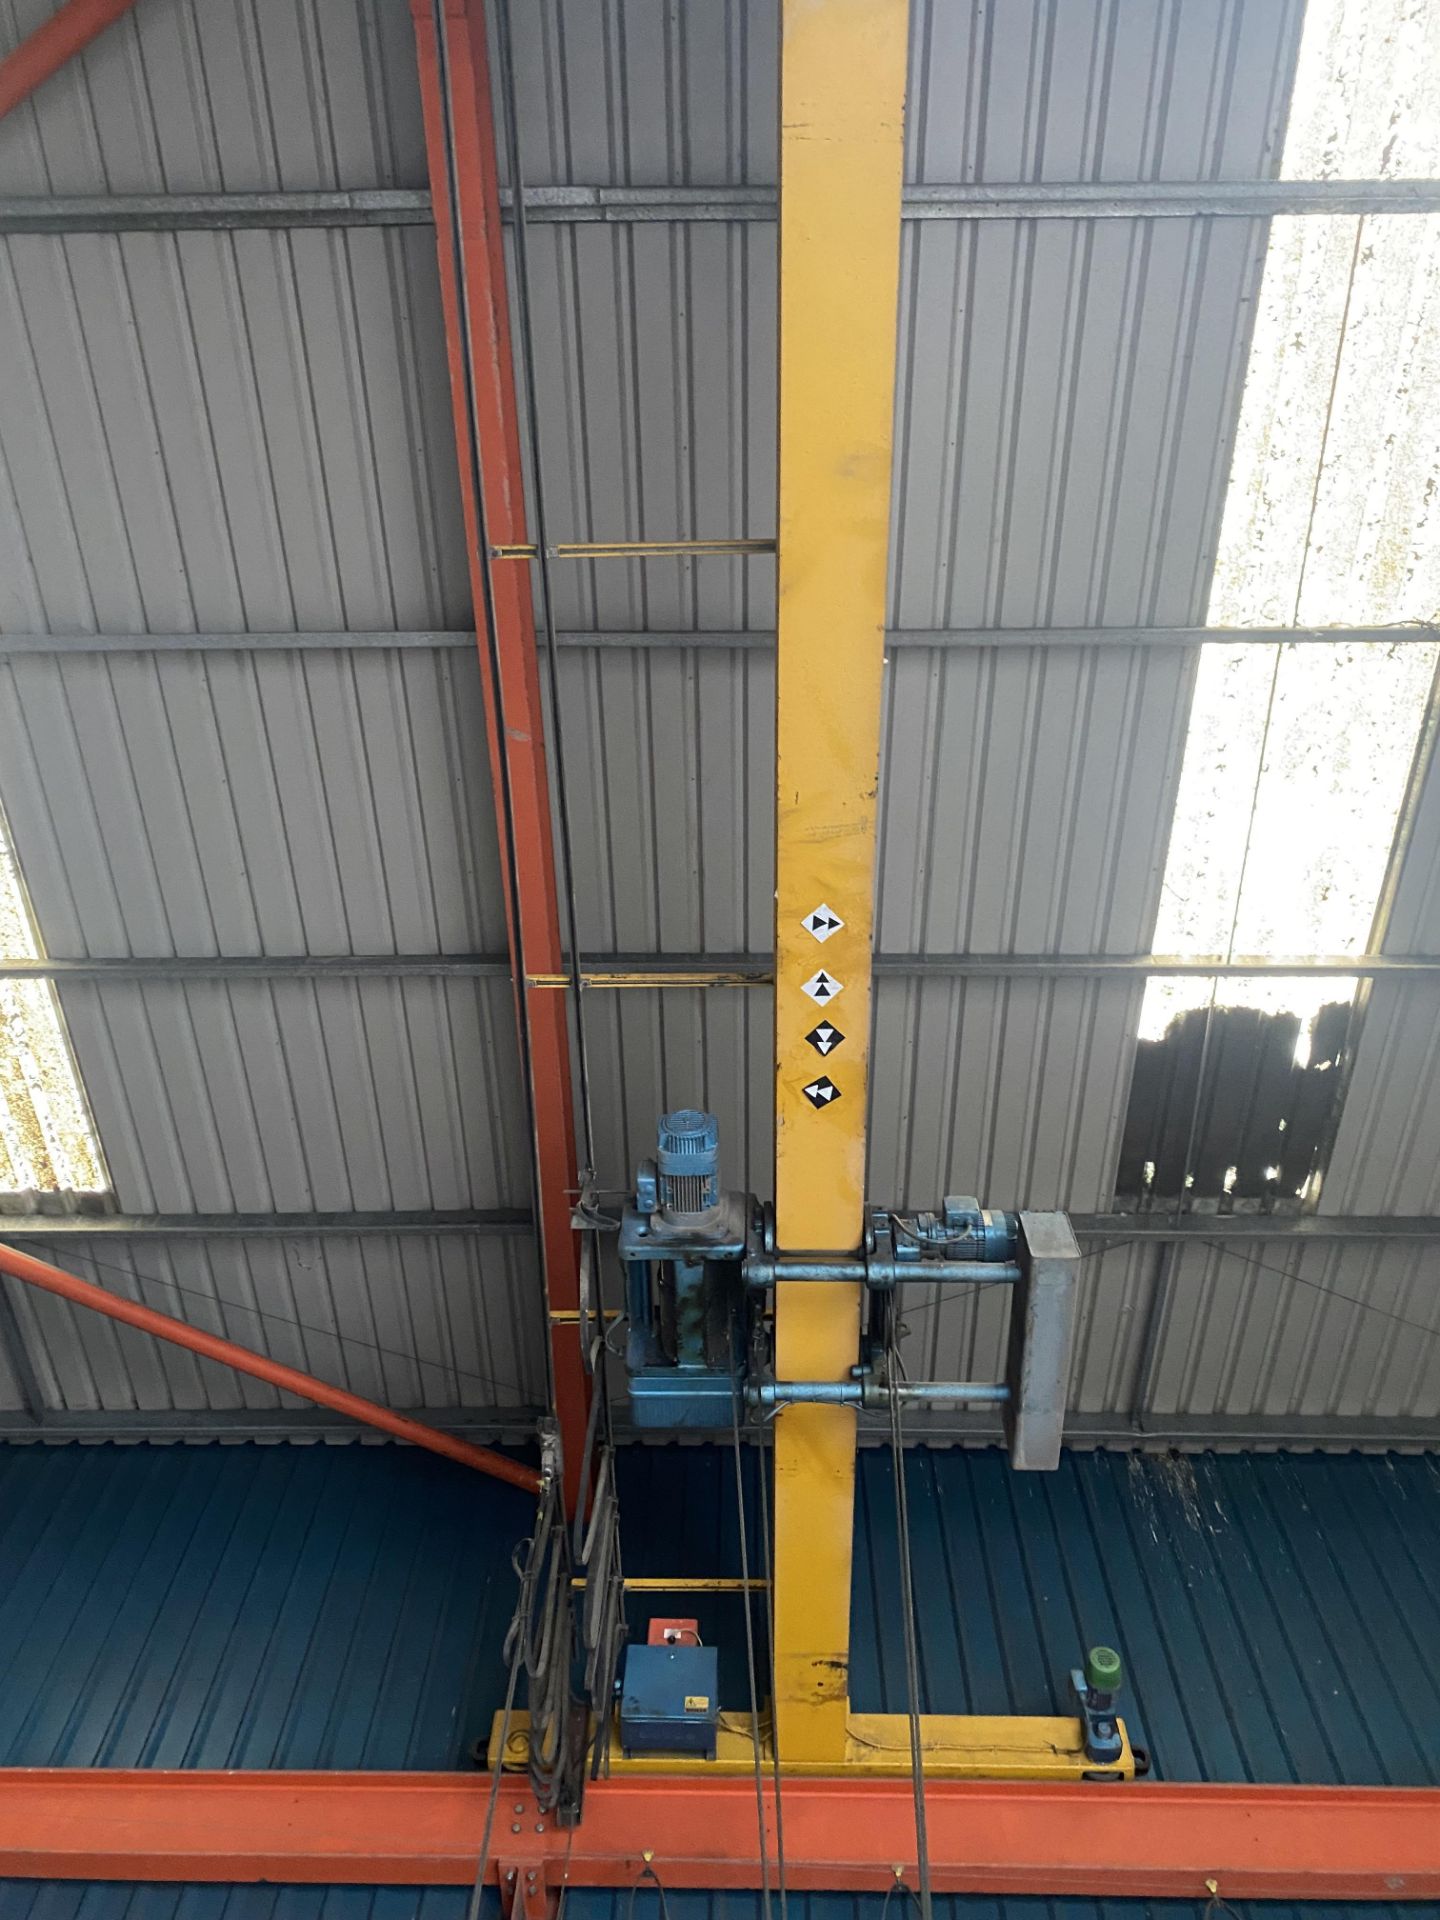 6T SWL DOUBLE GIRDER TRAVELLING OVERHEAD CRANE, approx. 7.4m span, with Demag wire rope hoist, - Image 4 of 9